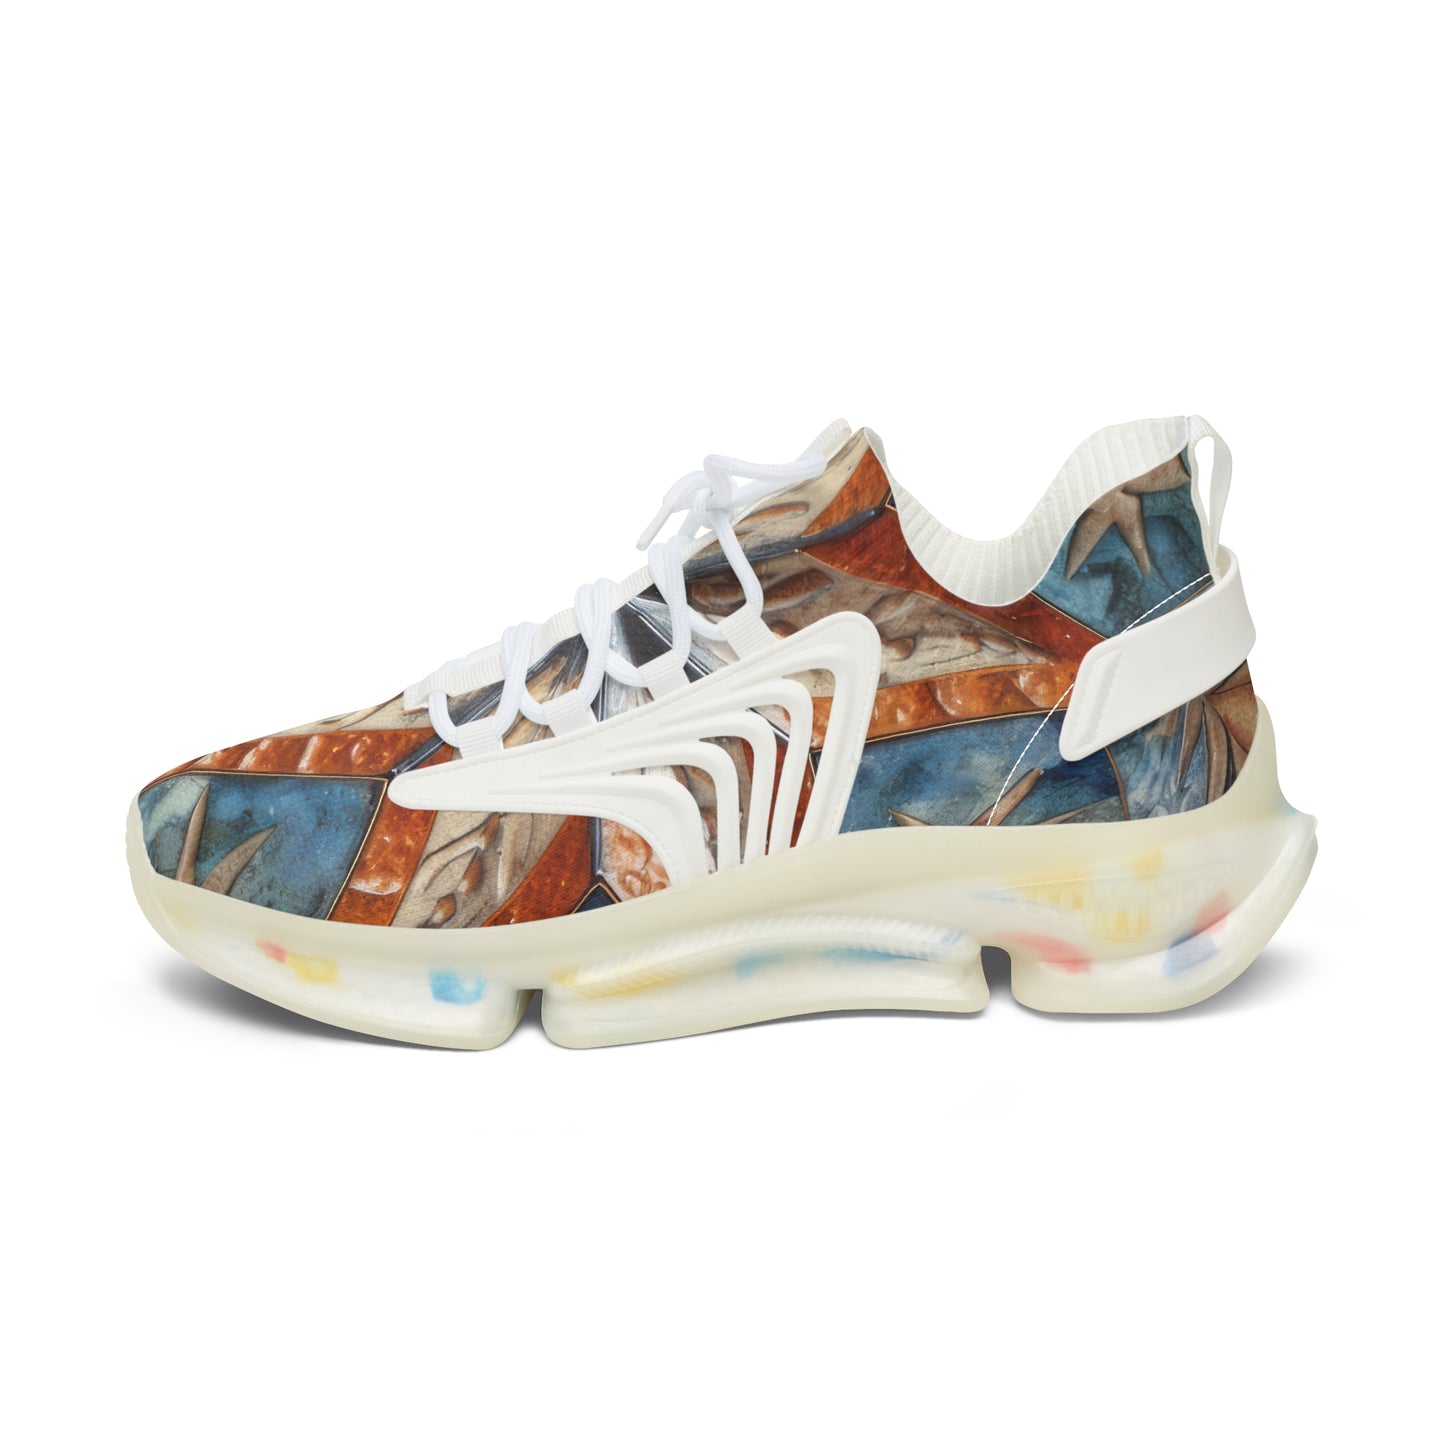 Beautiful Stars Abstract Star Style Orange, White And Blue Women's Mesh Sneakers